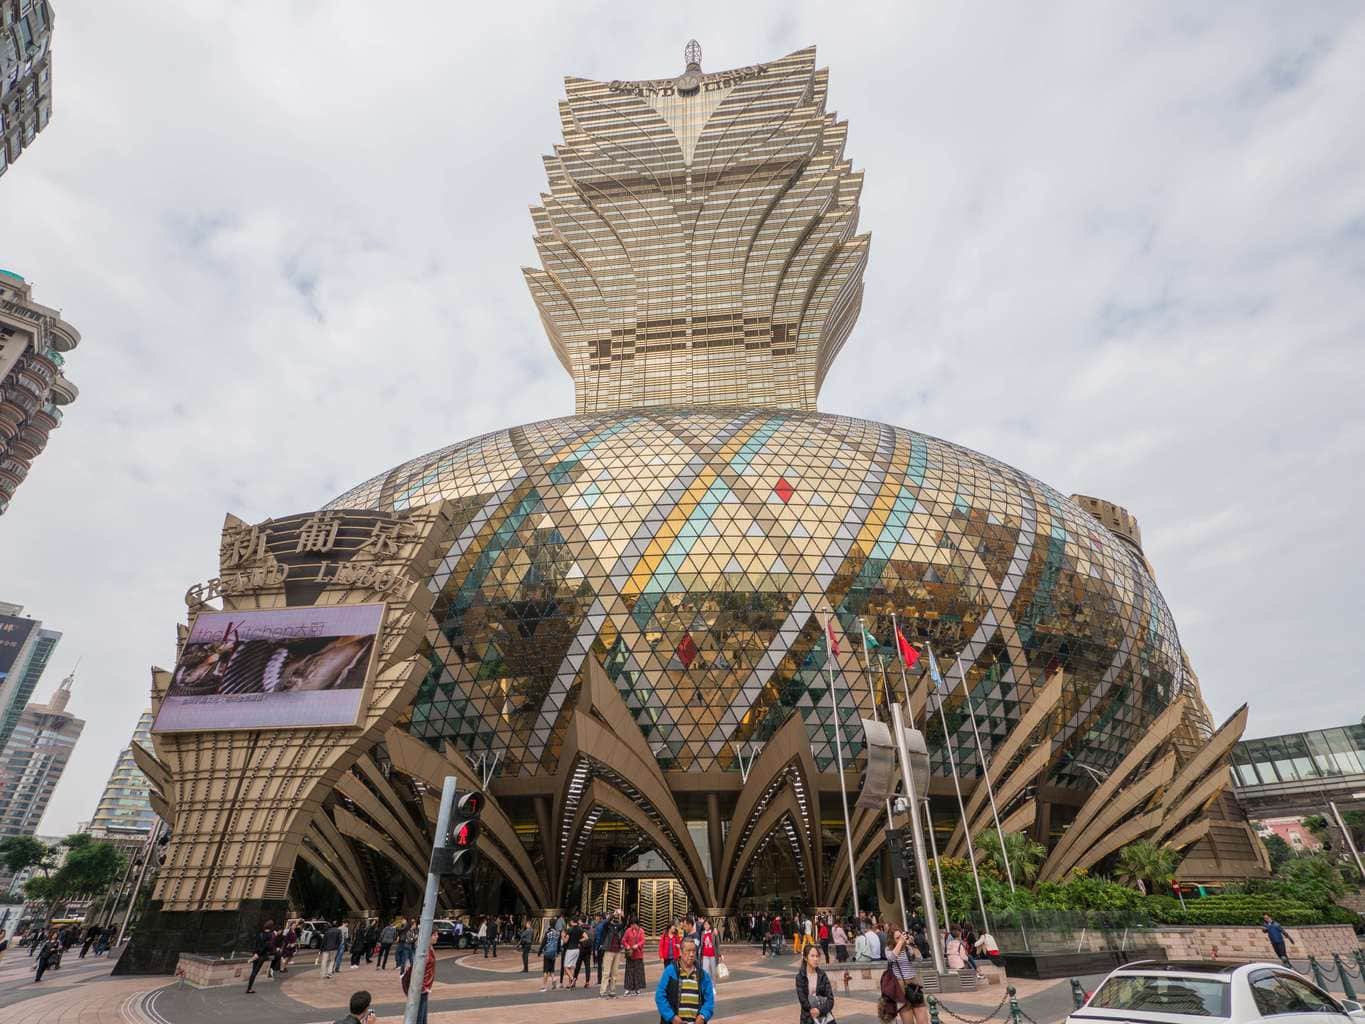 Grand Lisboa - a must visit on a day trip to Macau